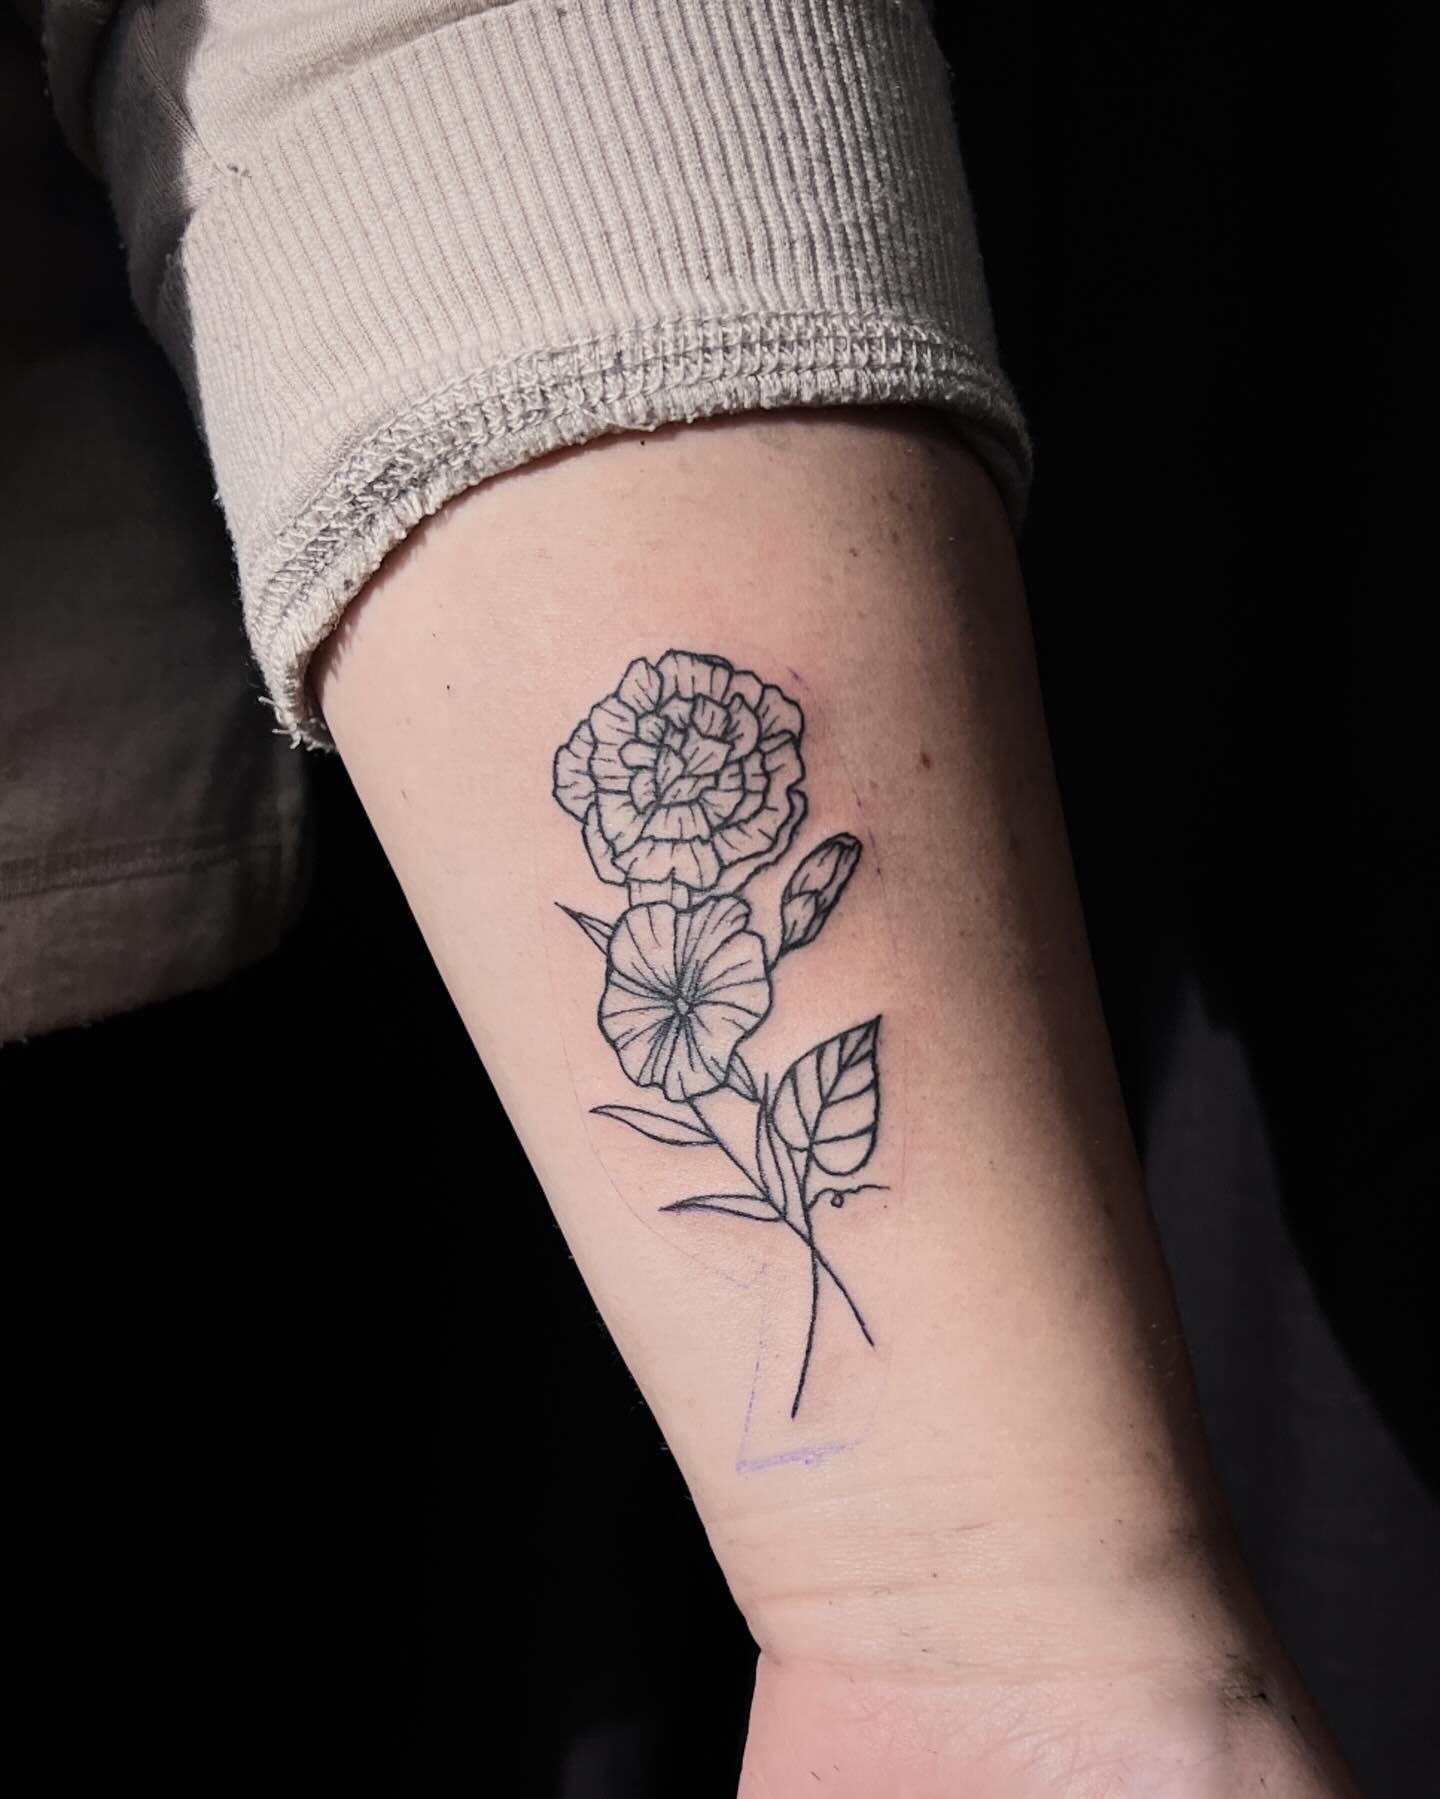 Thank you Brittany for coming in to get these sweet birth flowers for your first tattoo!
.
Carnation + morning glory
.
#learnjng #practicinglines #growing #flowers #birthflowers #carnation #morningglory